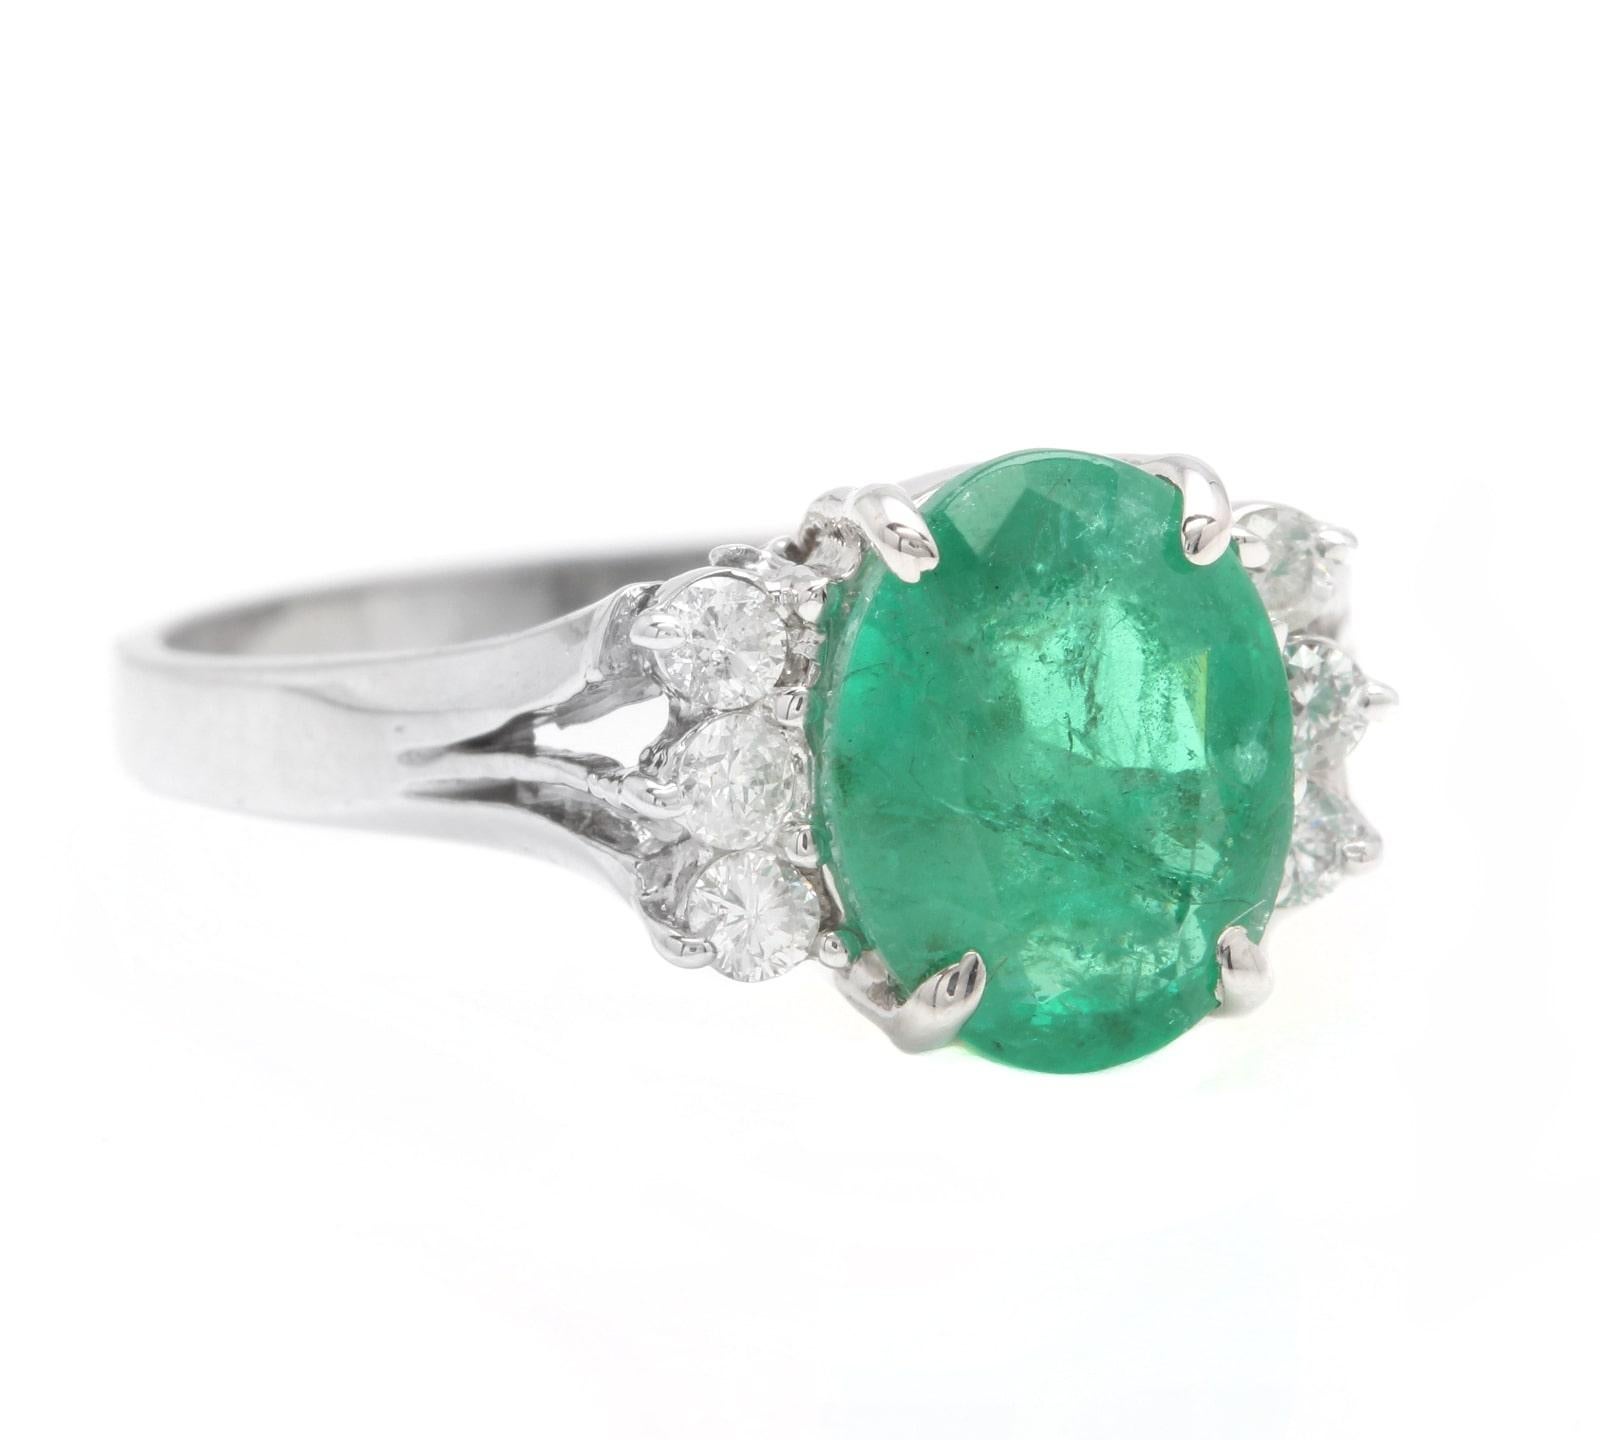 2.20 Carats Natural Emerald and Diamond 14K Solid White Gold Ring

Suggested Replacement Value: $4,500.00

Total Natural Green Emerald Weight is: Approx. 2.00 Carats (transparent) 

Emerald Measures: Approx. 9.00 x 7.00mm

Natural Round Diamonds